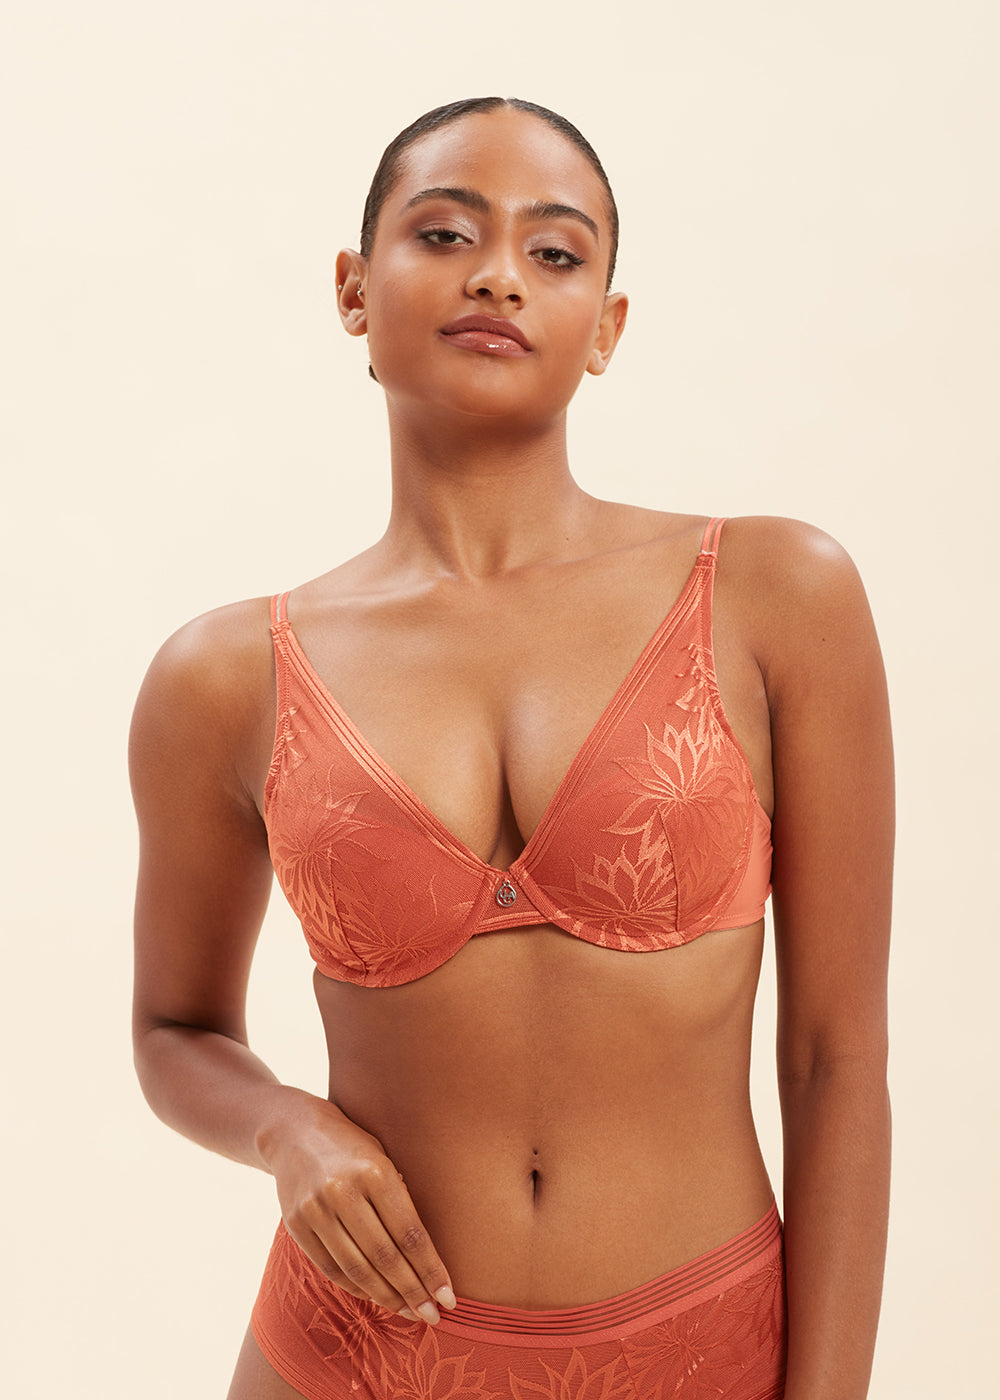 Stunning Front Strap Push Up Bra With Delicate Floral Lace